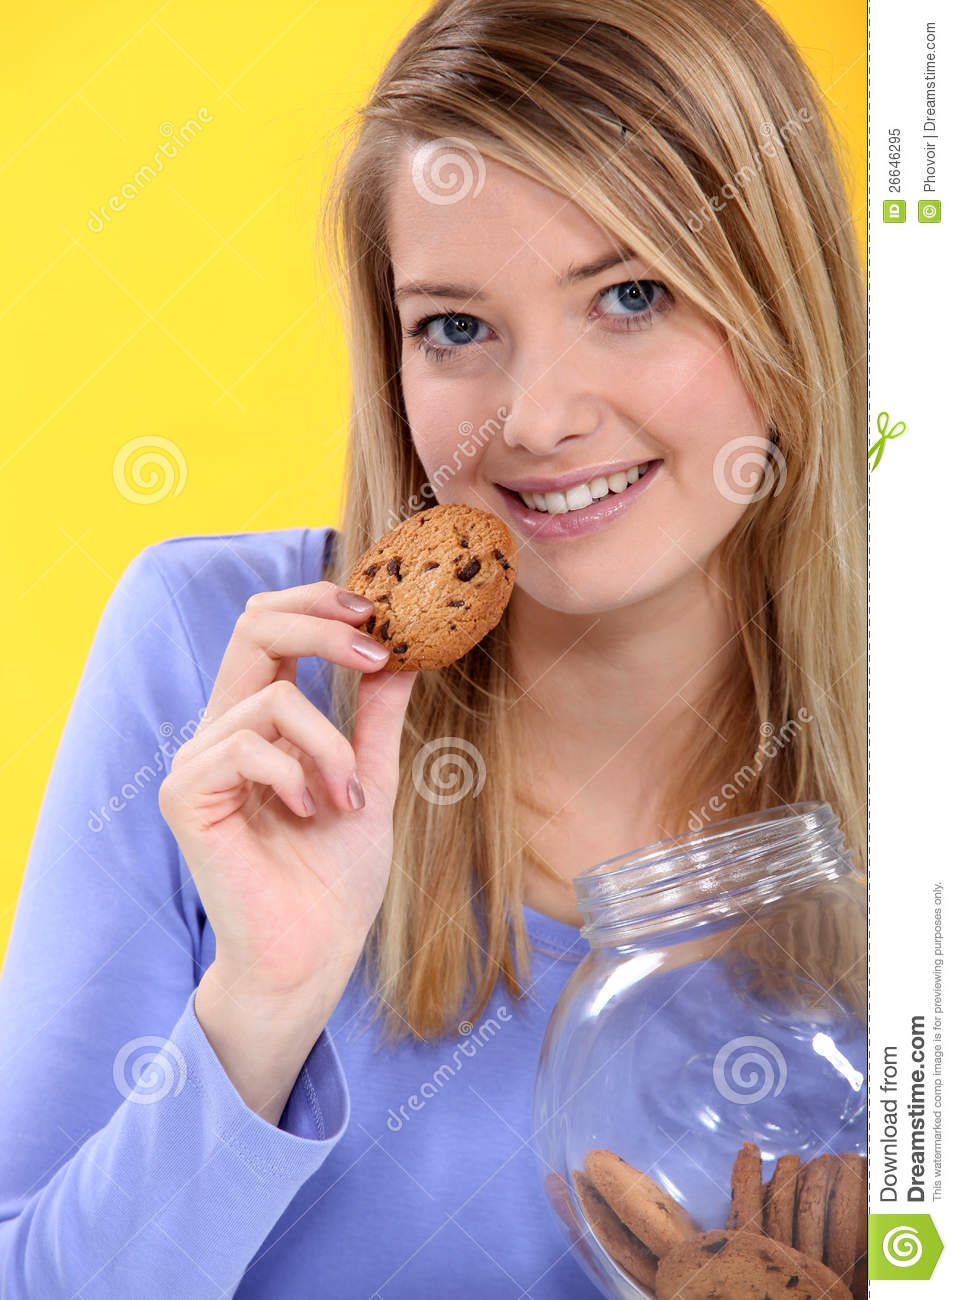 Woman Eating A Cookie Royalty Free Stock Photo   Image  26646295